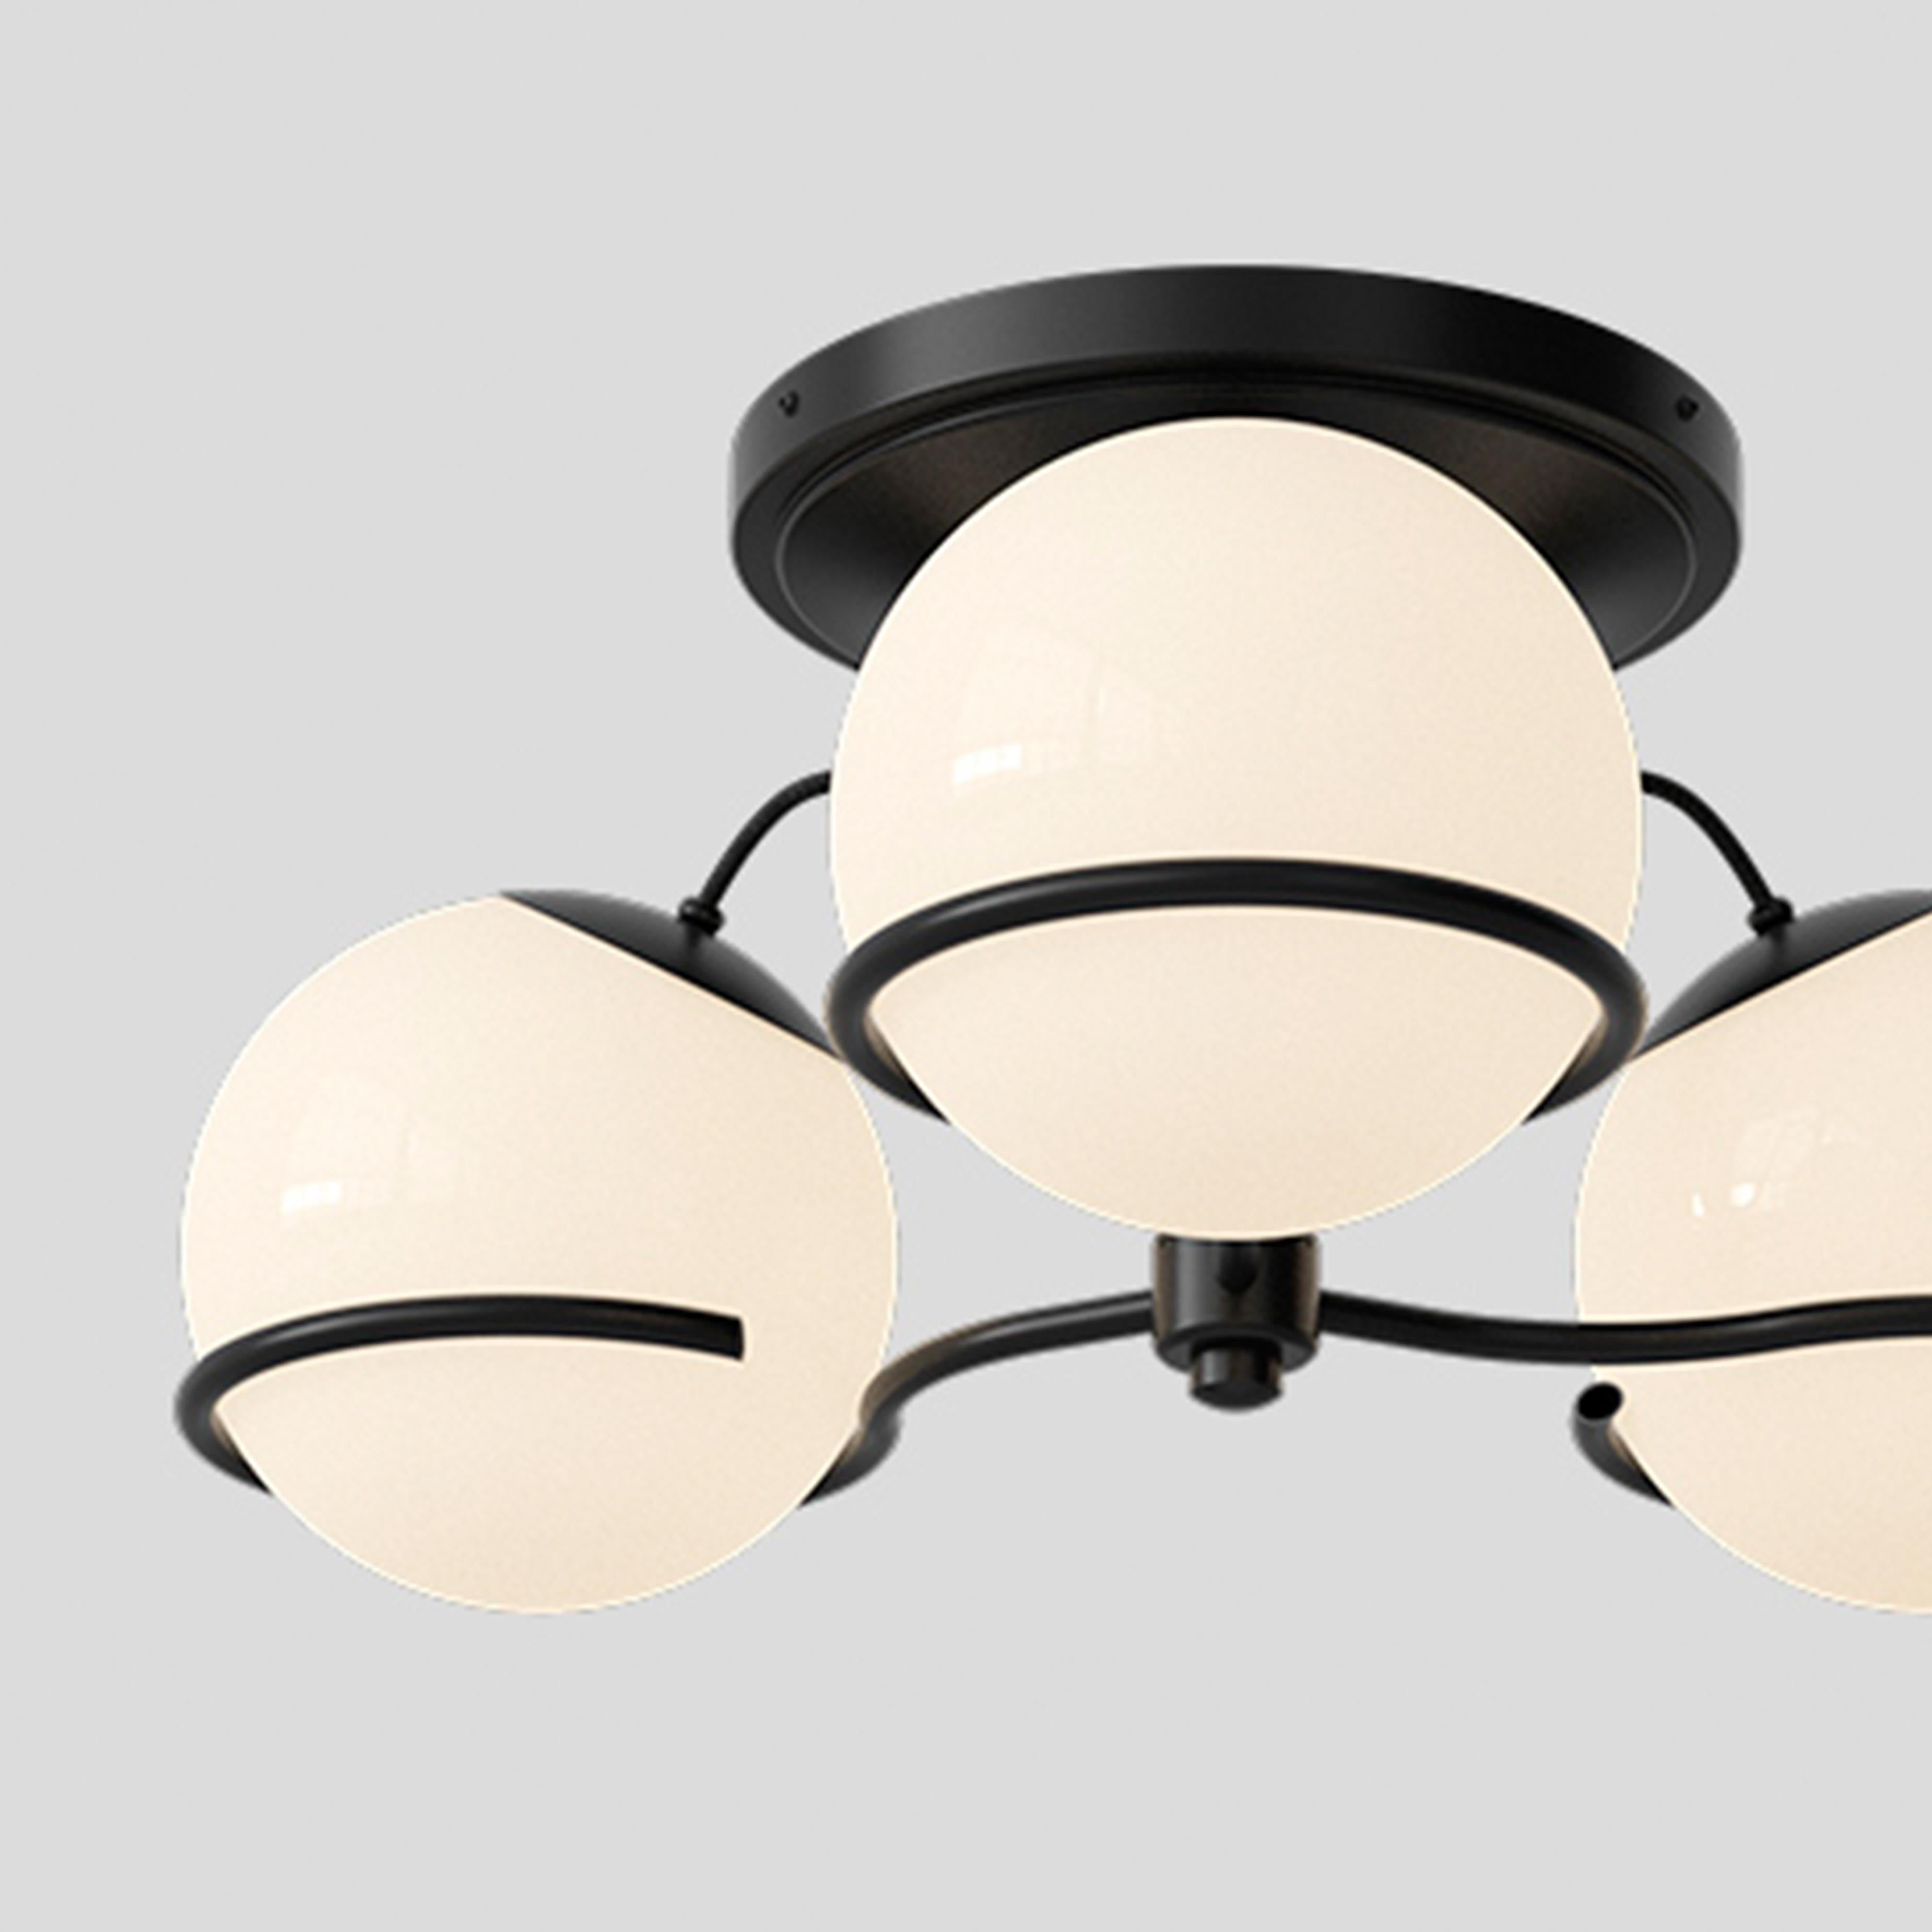 Model 2042/3
Design by Gino Sarfatti
The two blown opaline glass spheres are gently held in place by two Black, or Champagne, painted aluminum rings. Each ring has a small cut, enabling the spheres to be placed facing downward or upward and thus